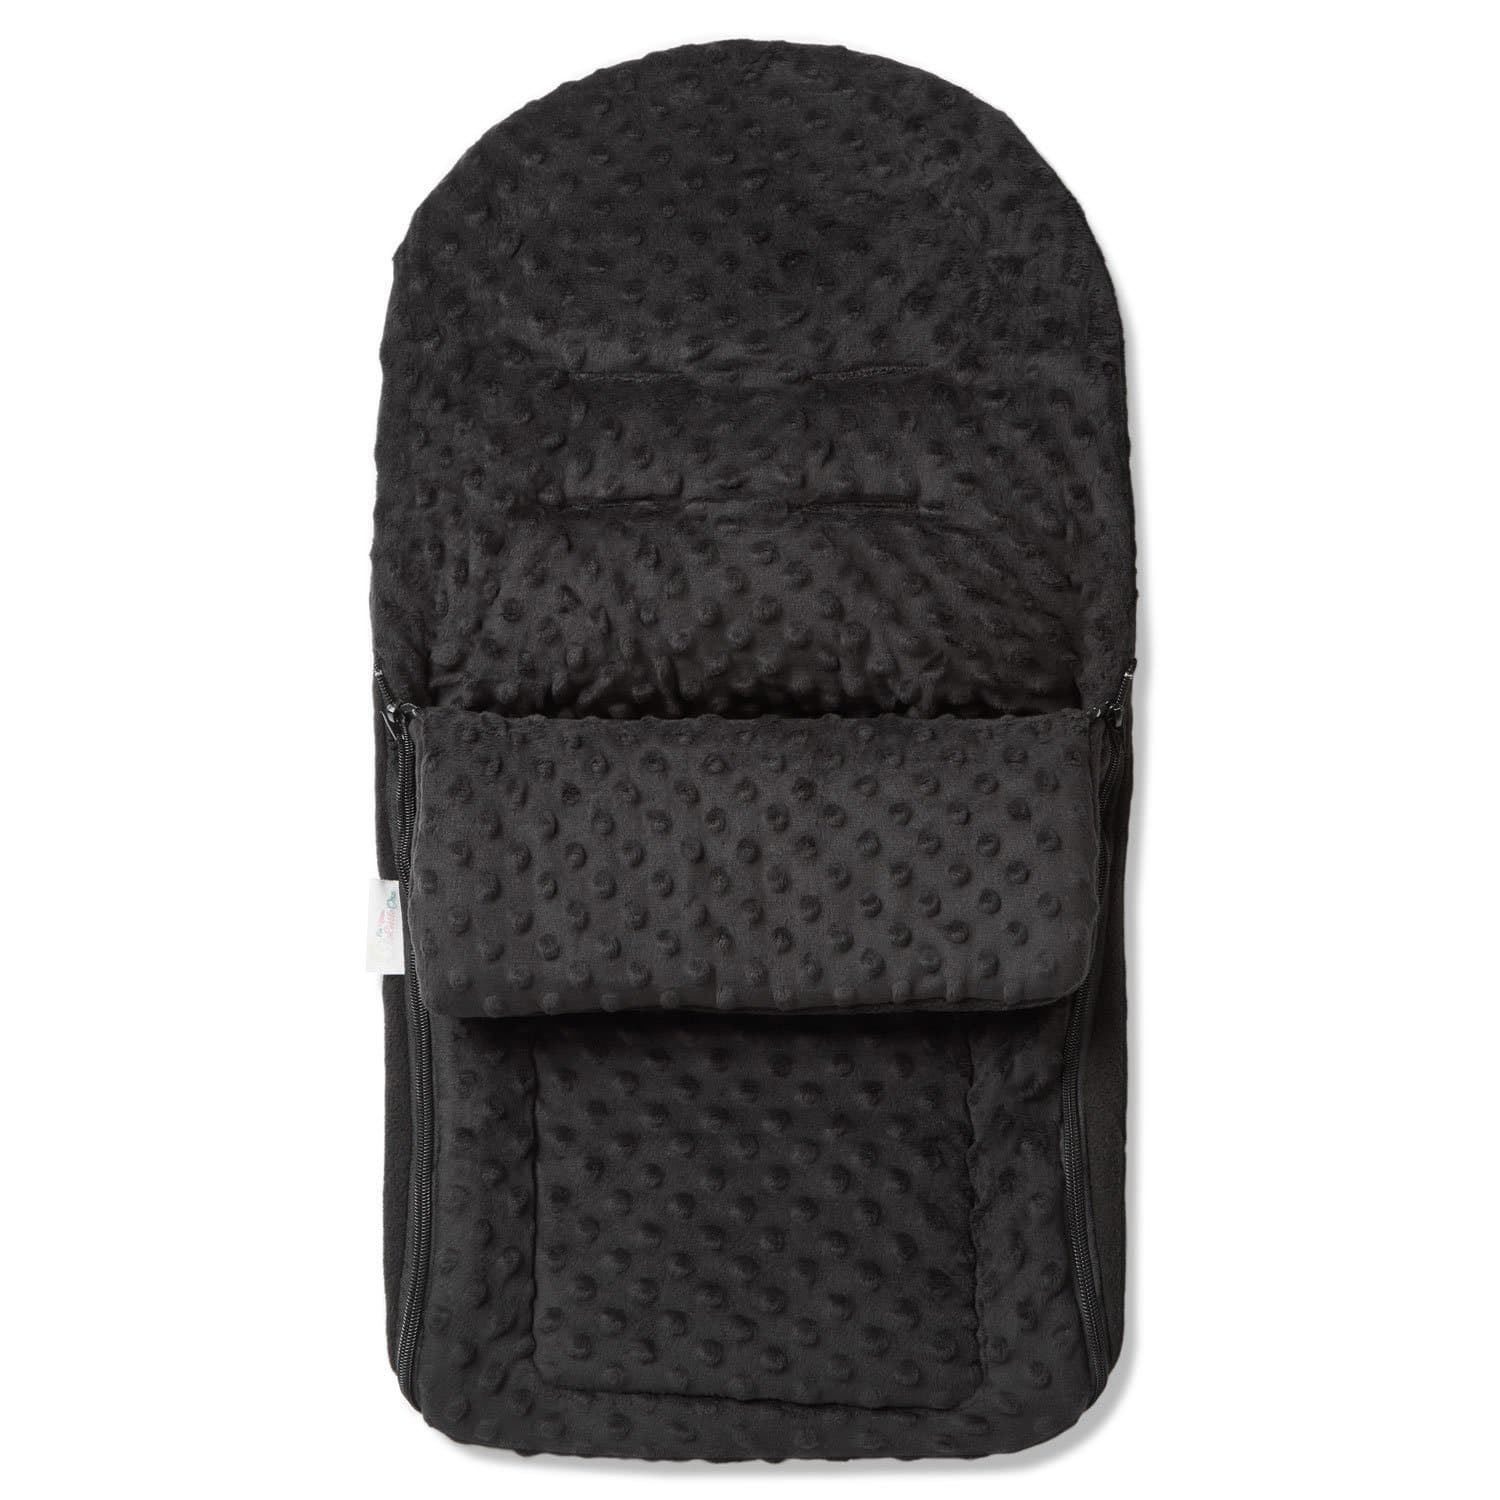 Dimple Car Seat Footmuff / Cosy Toes Compatible with Cybex - For Your Little One